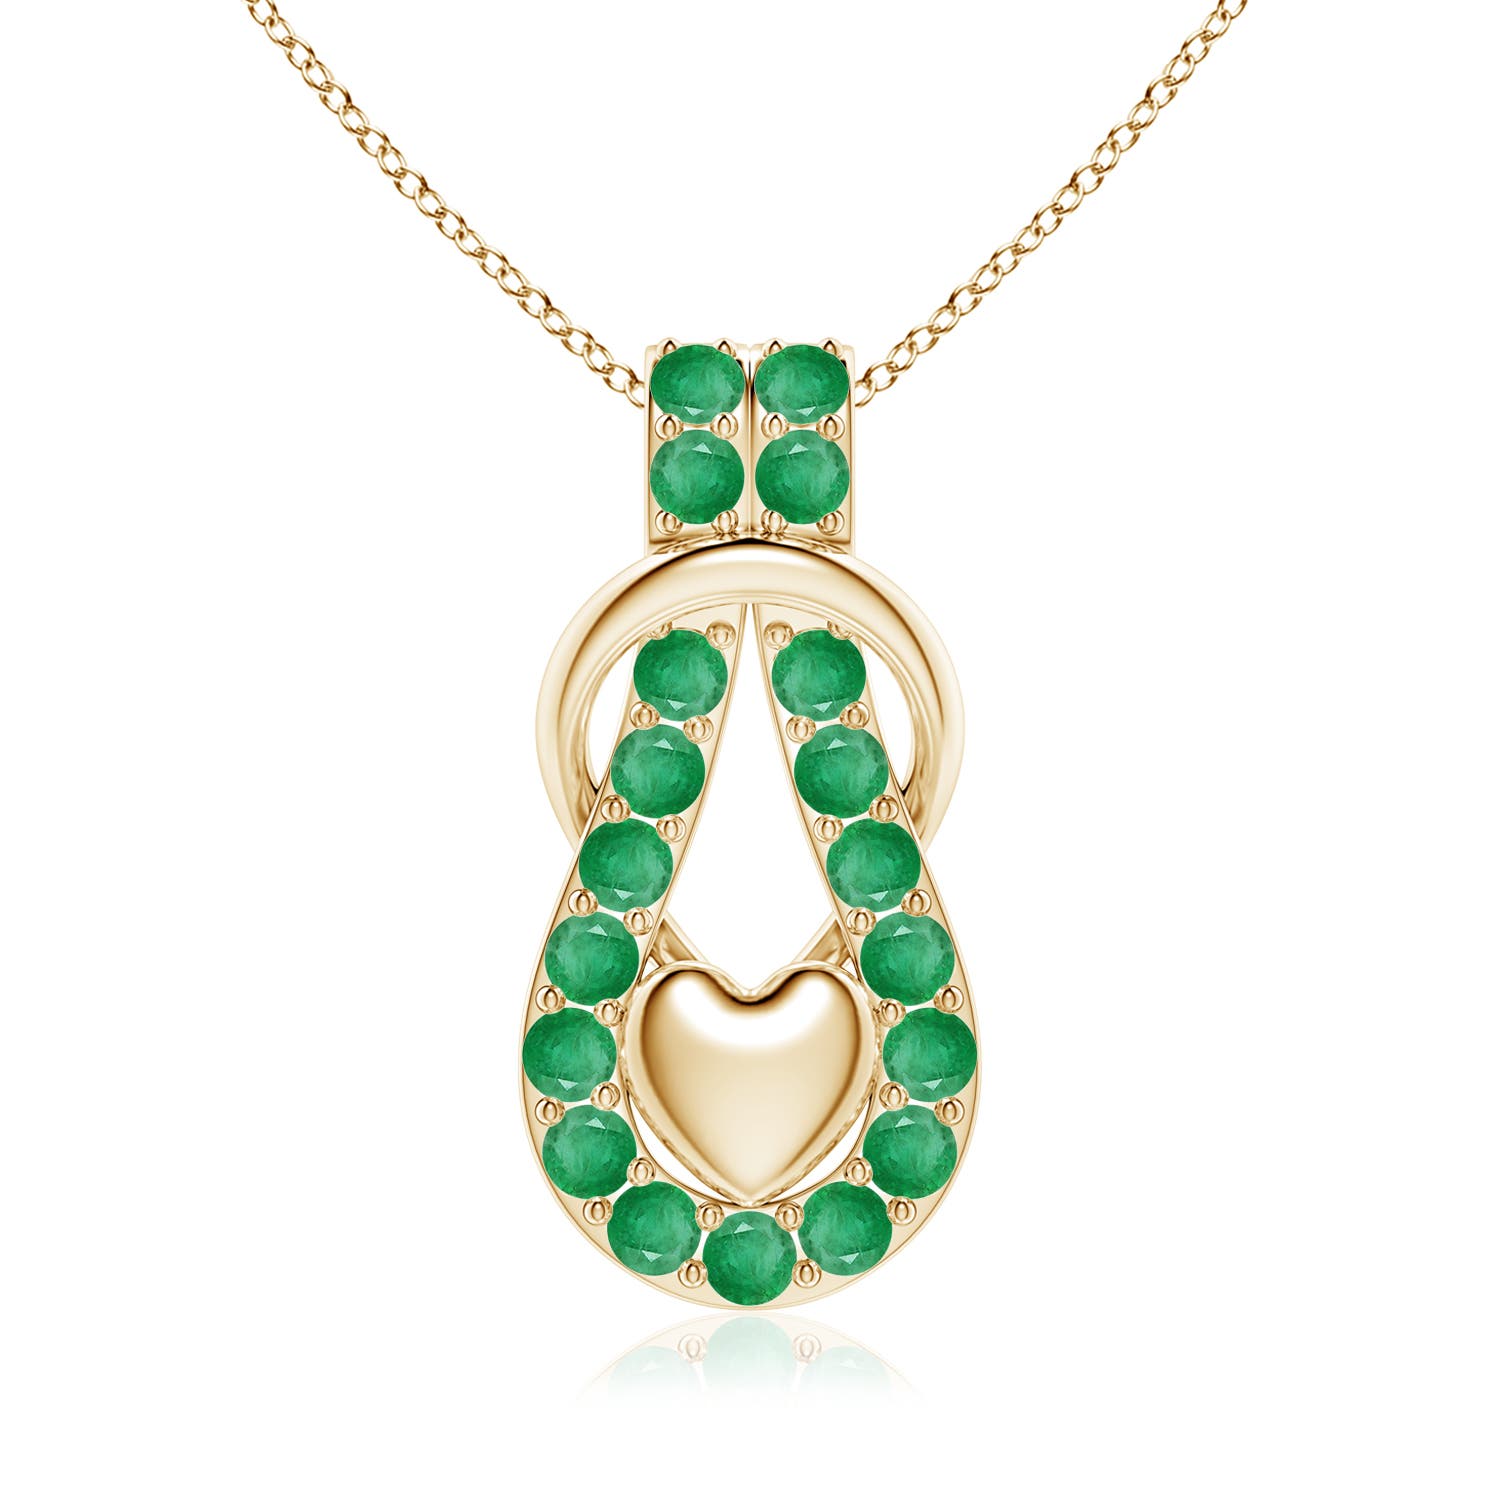 A - Emerald / 2.85 CT / 18 KT Yellow Gold